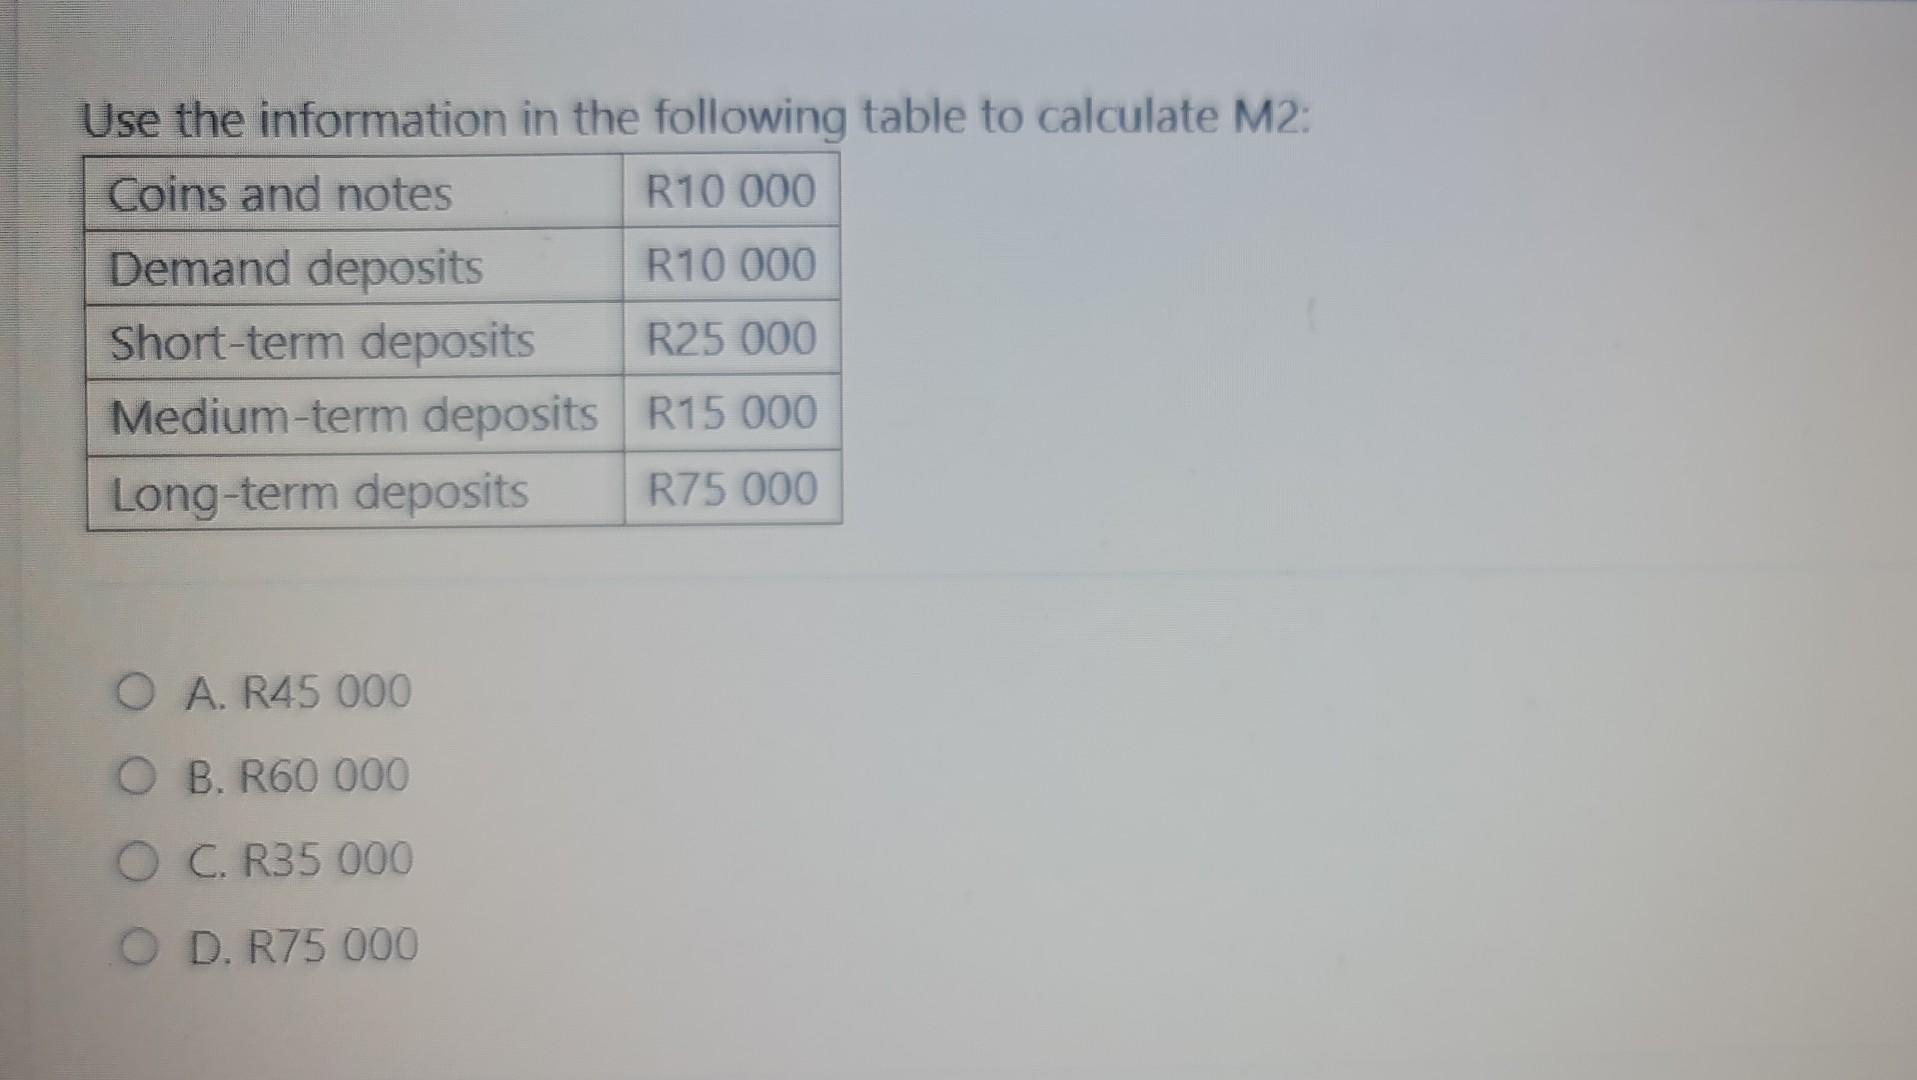 Use the information in the following table to calculate M2: A. R45 000 B. R60 000 C. R35 000 D. R75 000